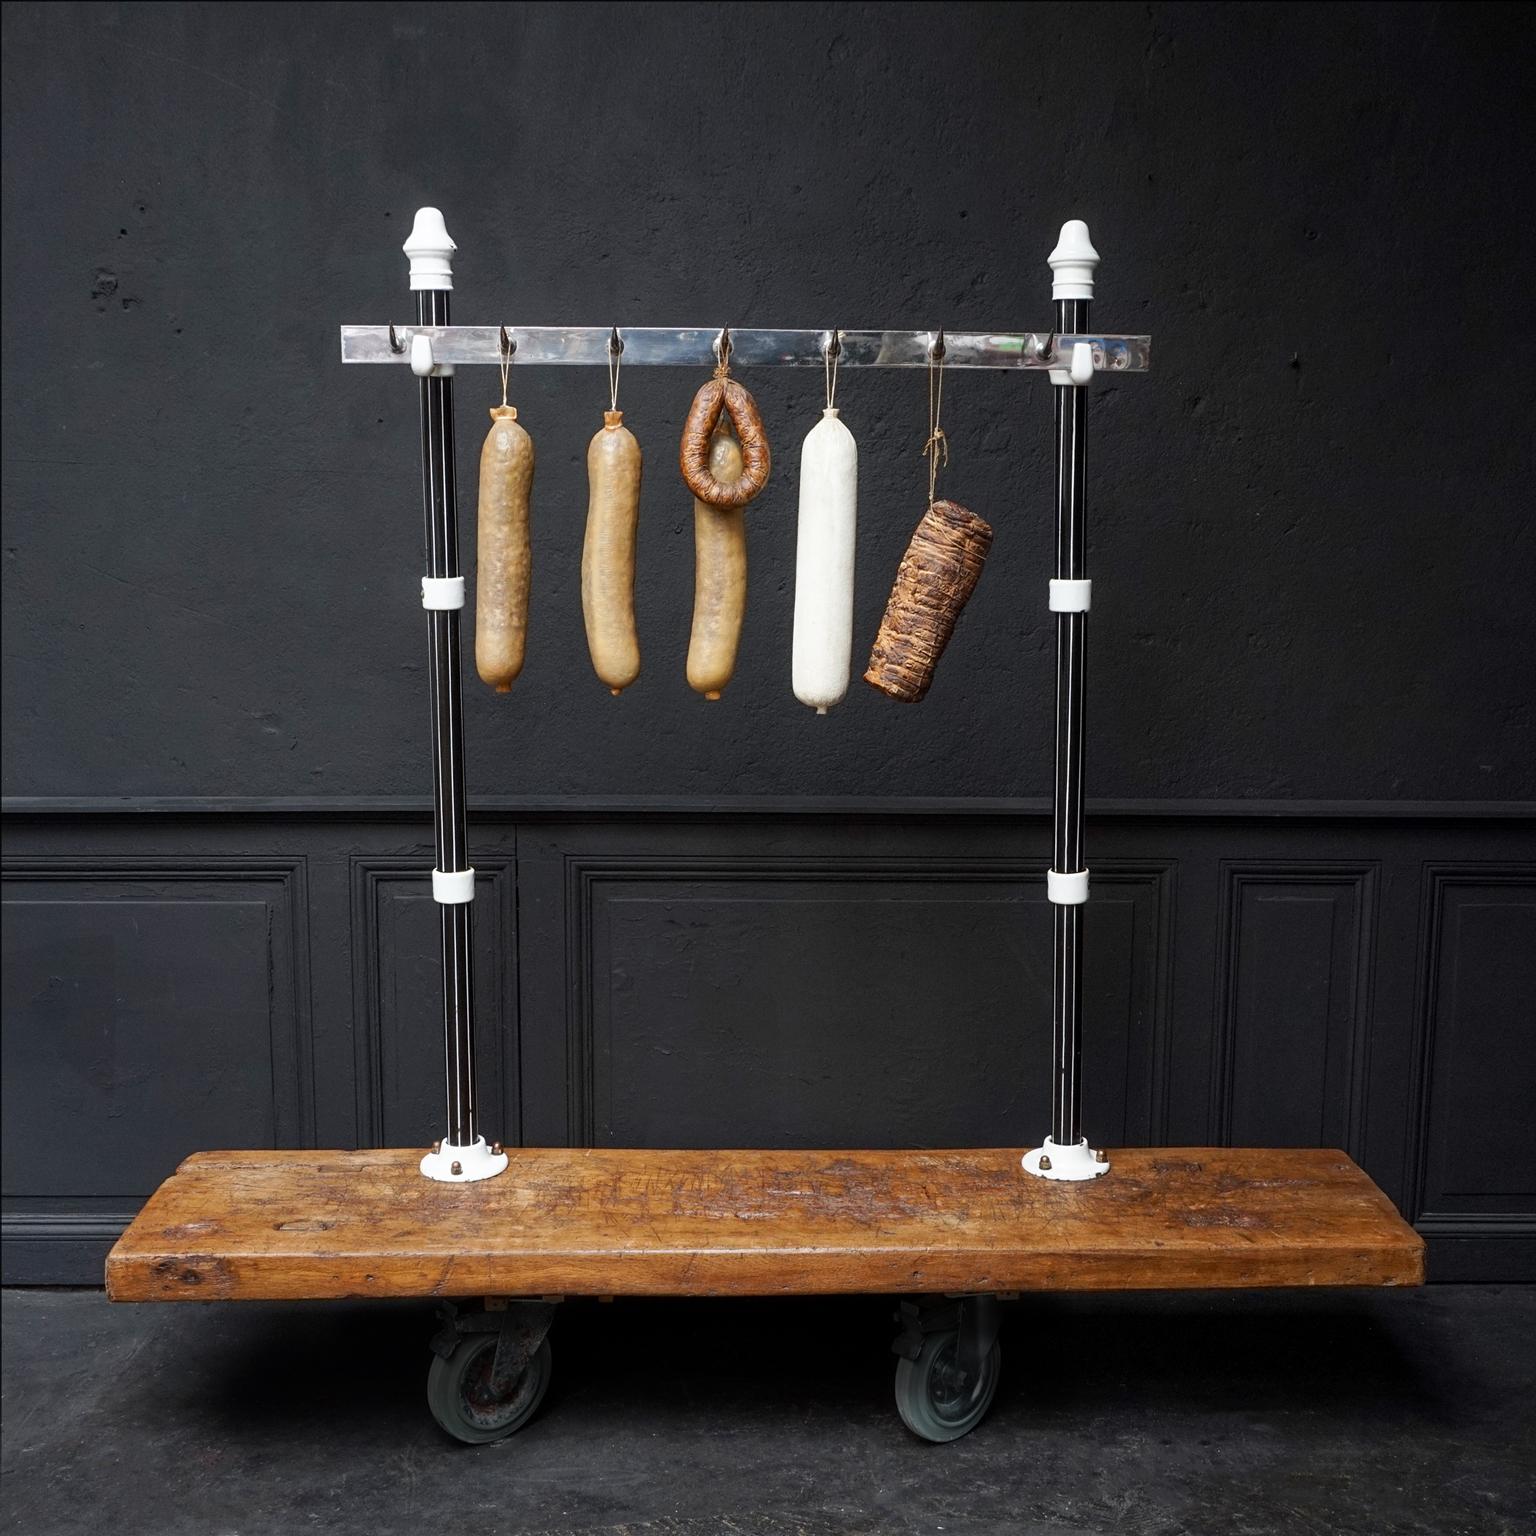 Heavy early 20th century Art-Deco window display butcher meat rack set, from a 1920s-1930s Butcher shop. Set of two black and white enamelled cast iron poles, with a heavy metal meat rack with 7 very sharp hooks. The poles can be mounted with the